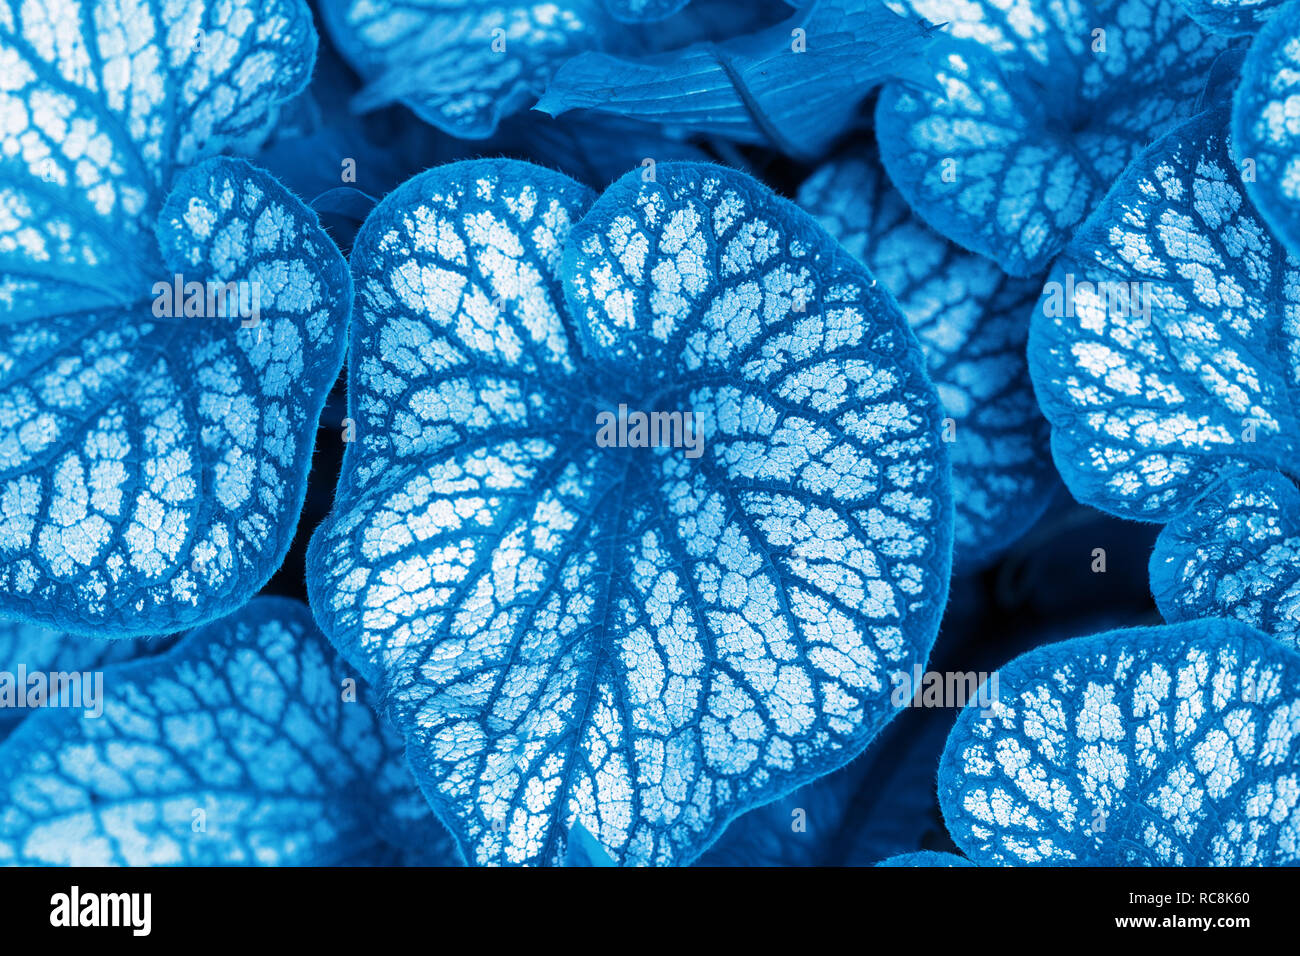 Blue Leaves With Silver Gray Almost White Spots Turquoise Leaves With White Dots Stock Photo Alamy